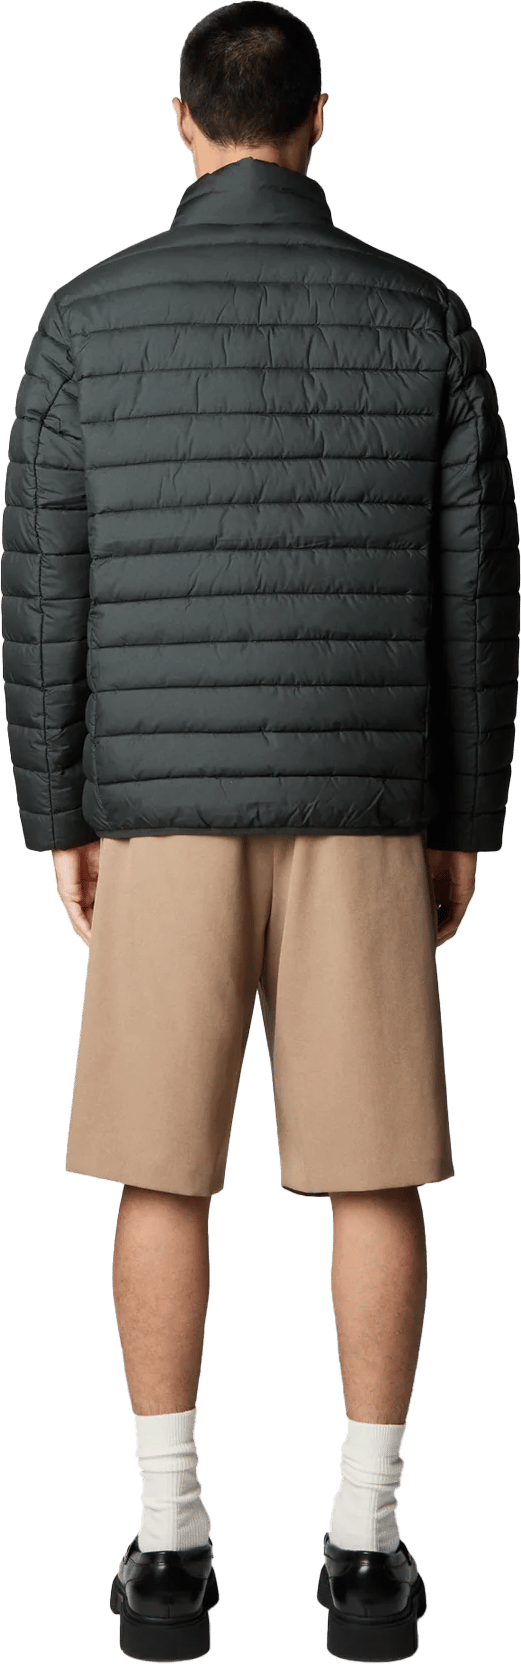 Men's Puffer Jacket Erion Green Black Save the Duck